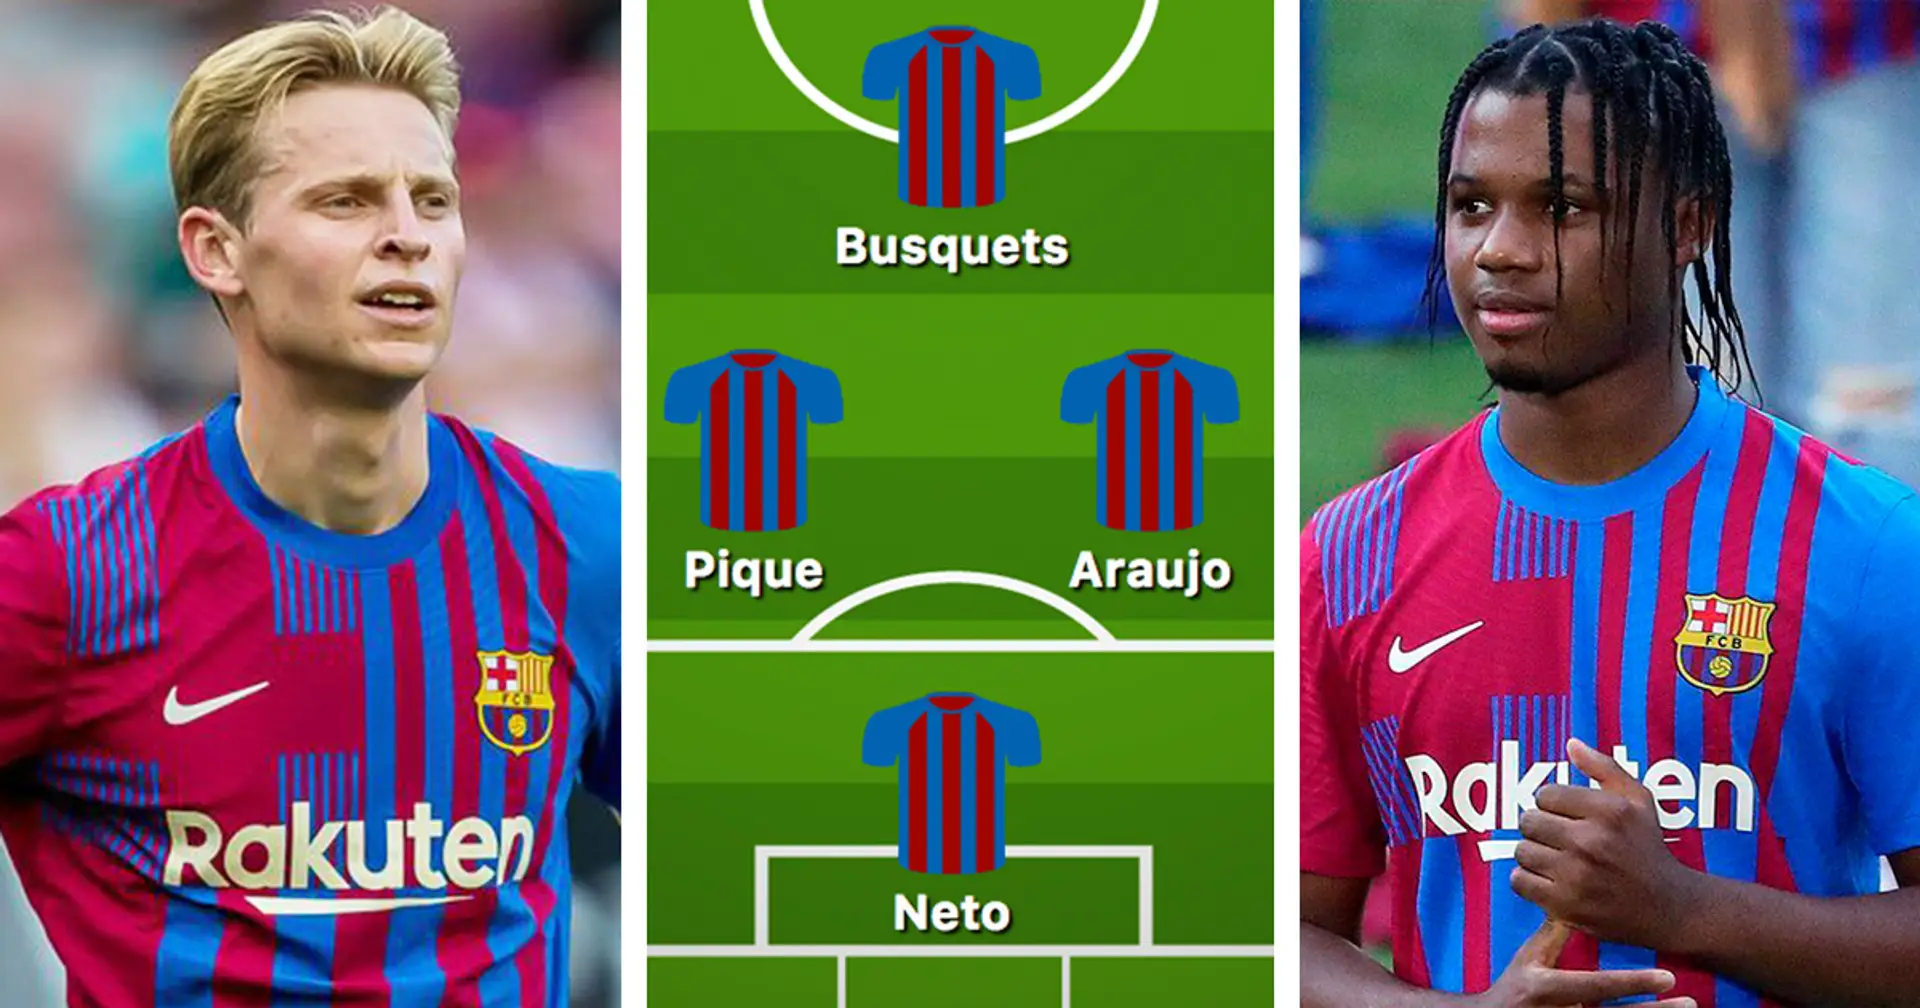 La Liga starts in 10 days: How Barca could line up with latest transfers & injuries in mind